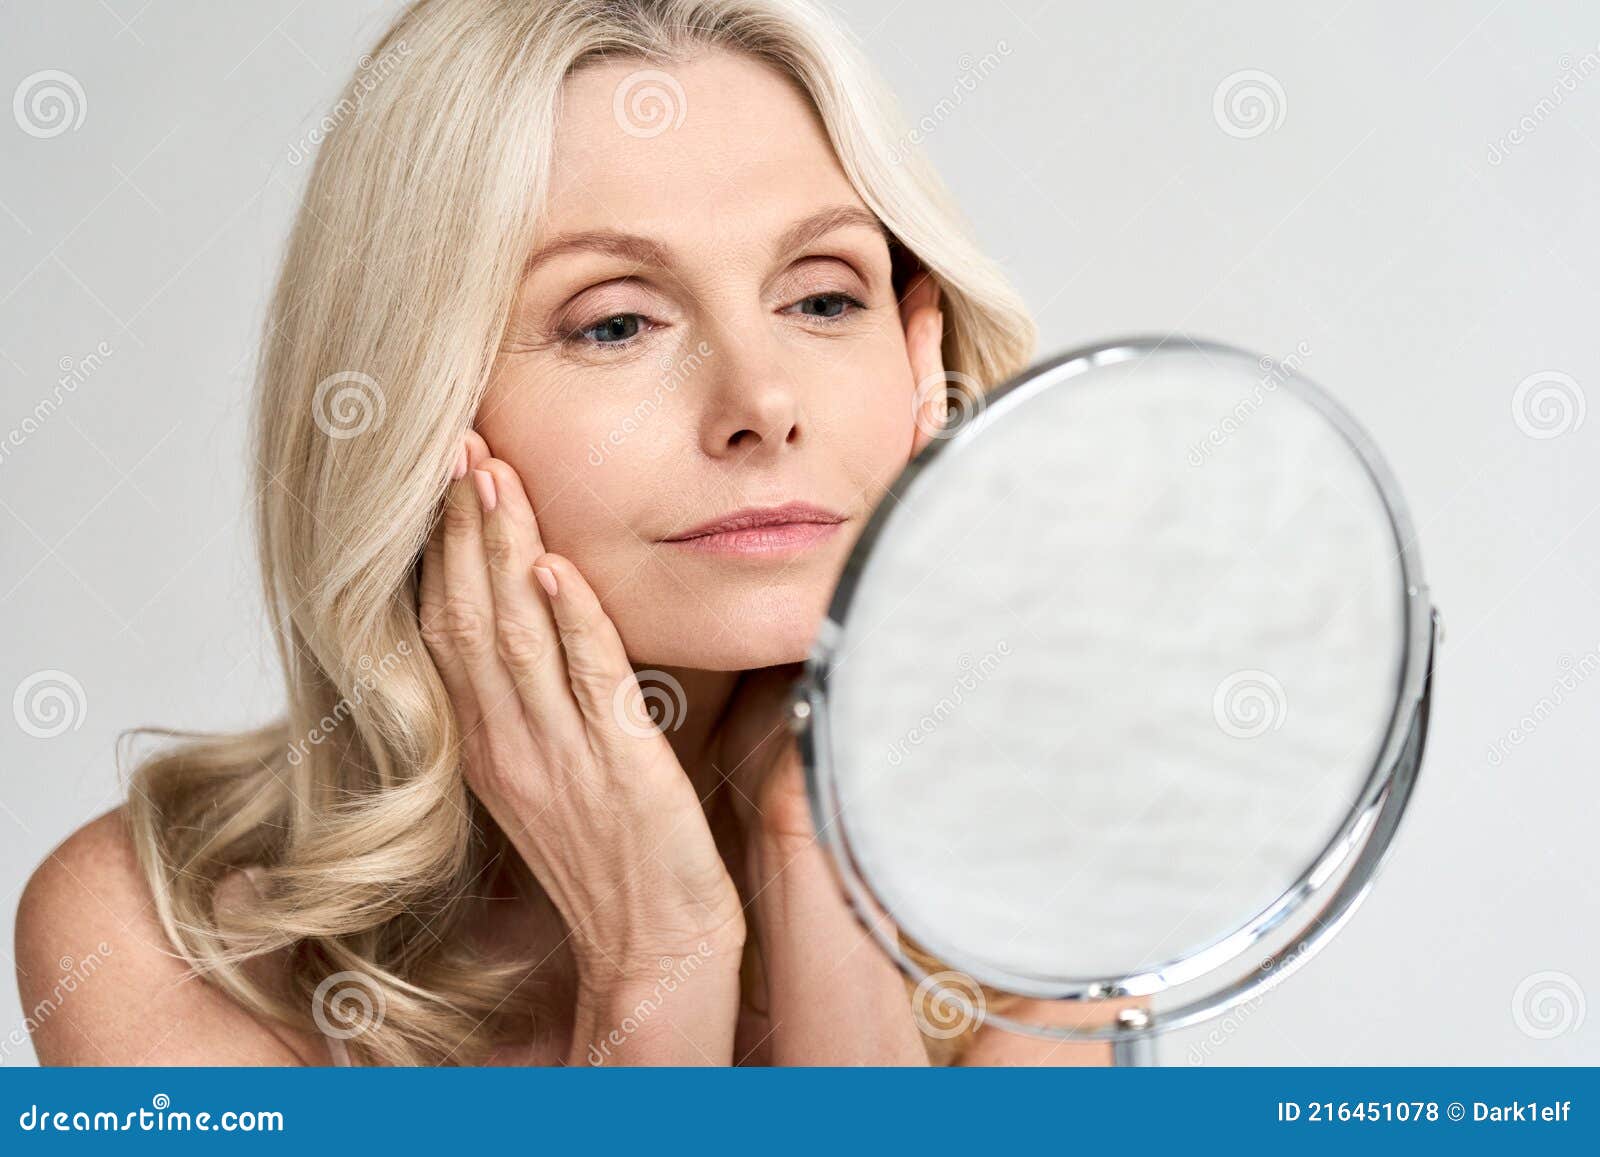 closeup portrait middle age 50 woman looking at mirror, touching healthy skin.